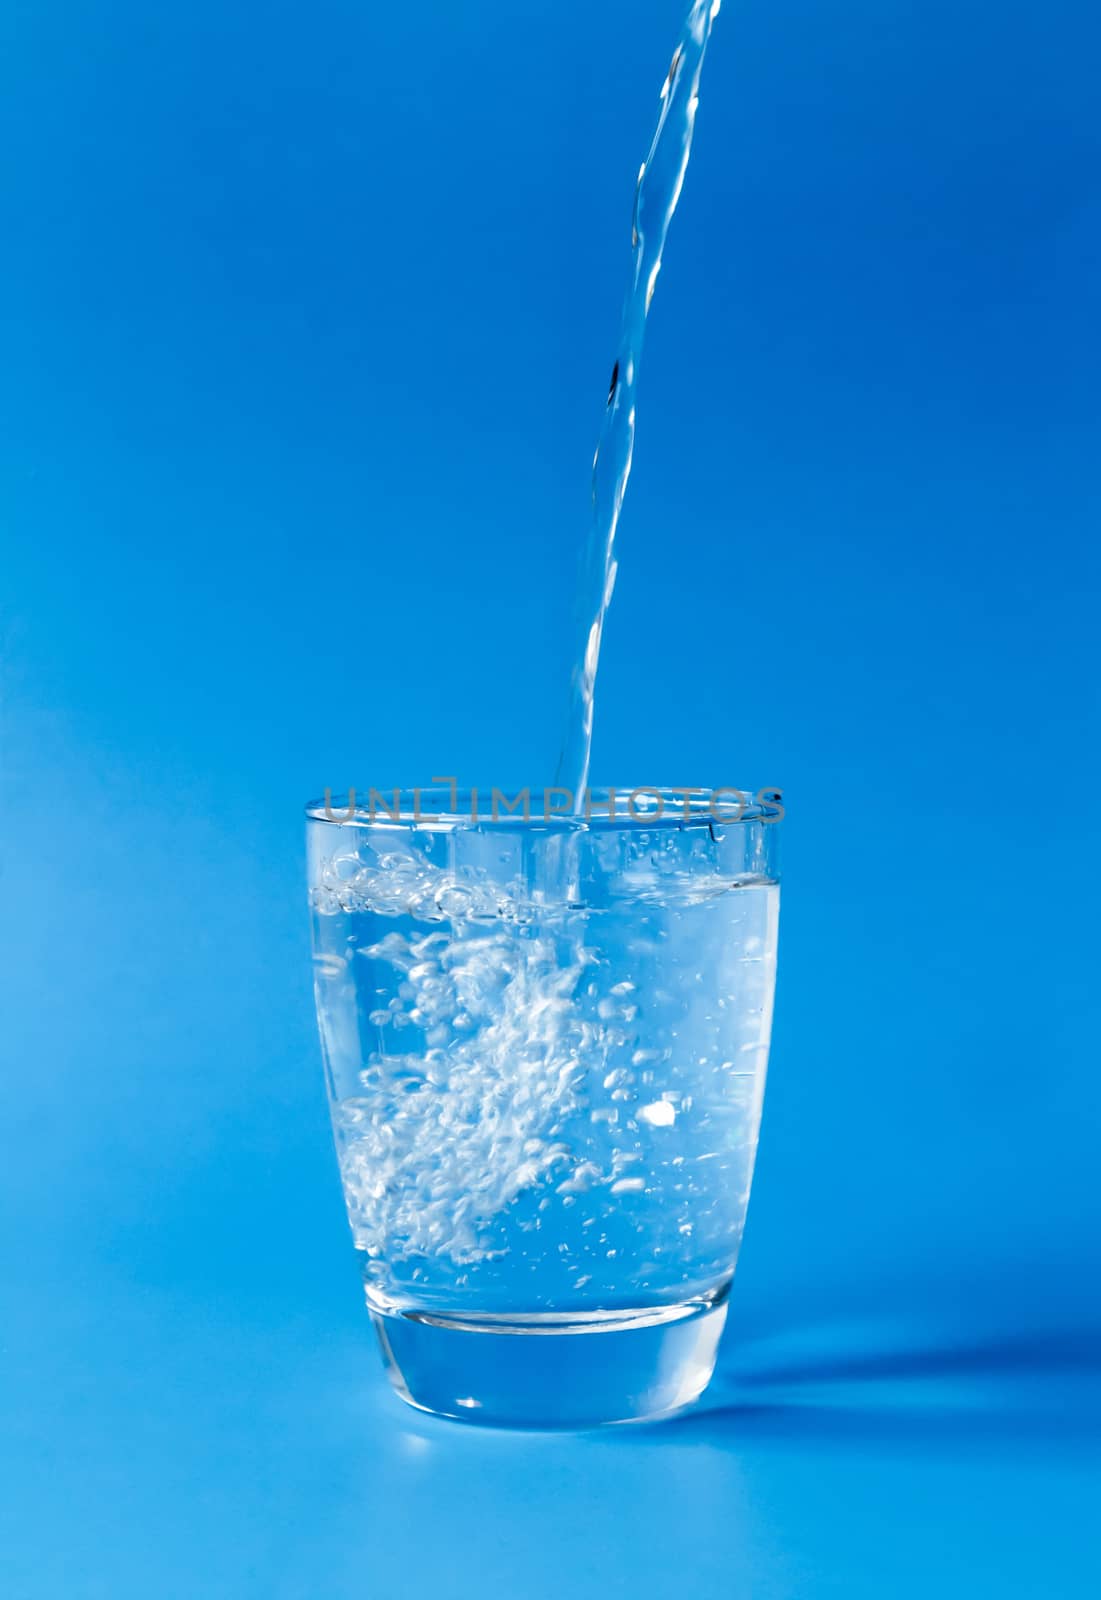 Pouring water into glass on blue background by pt.pongsak@gmail.com